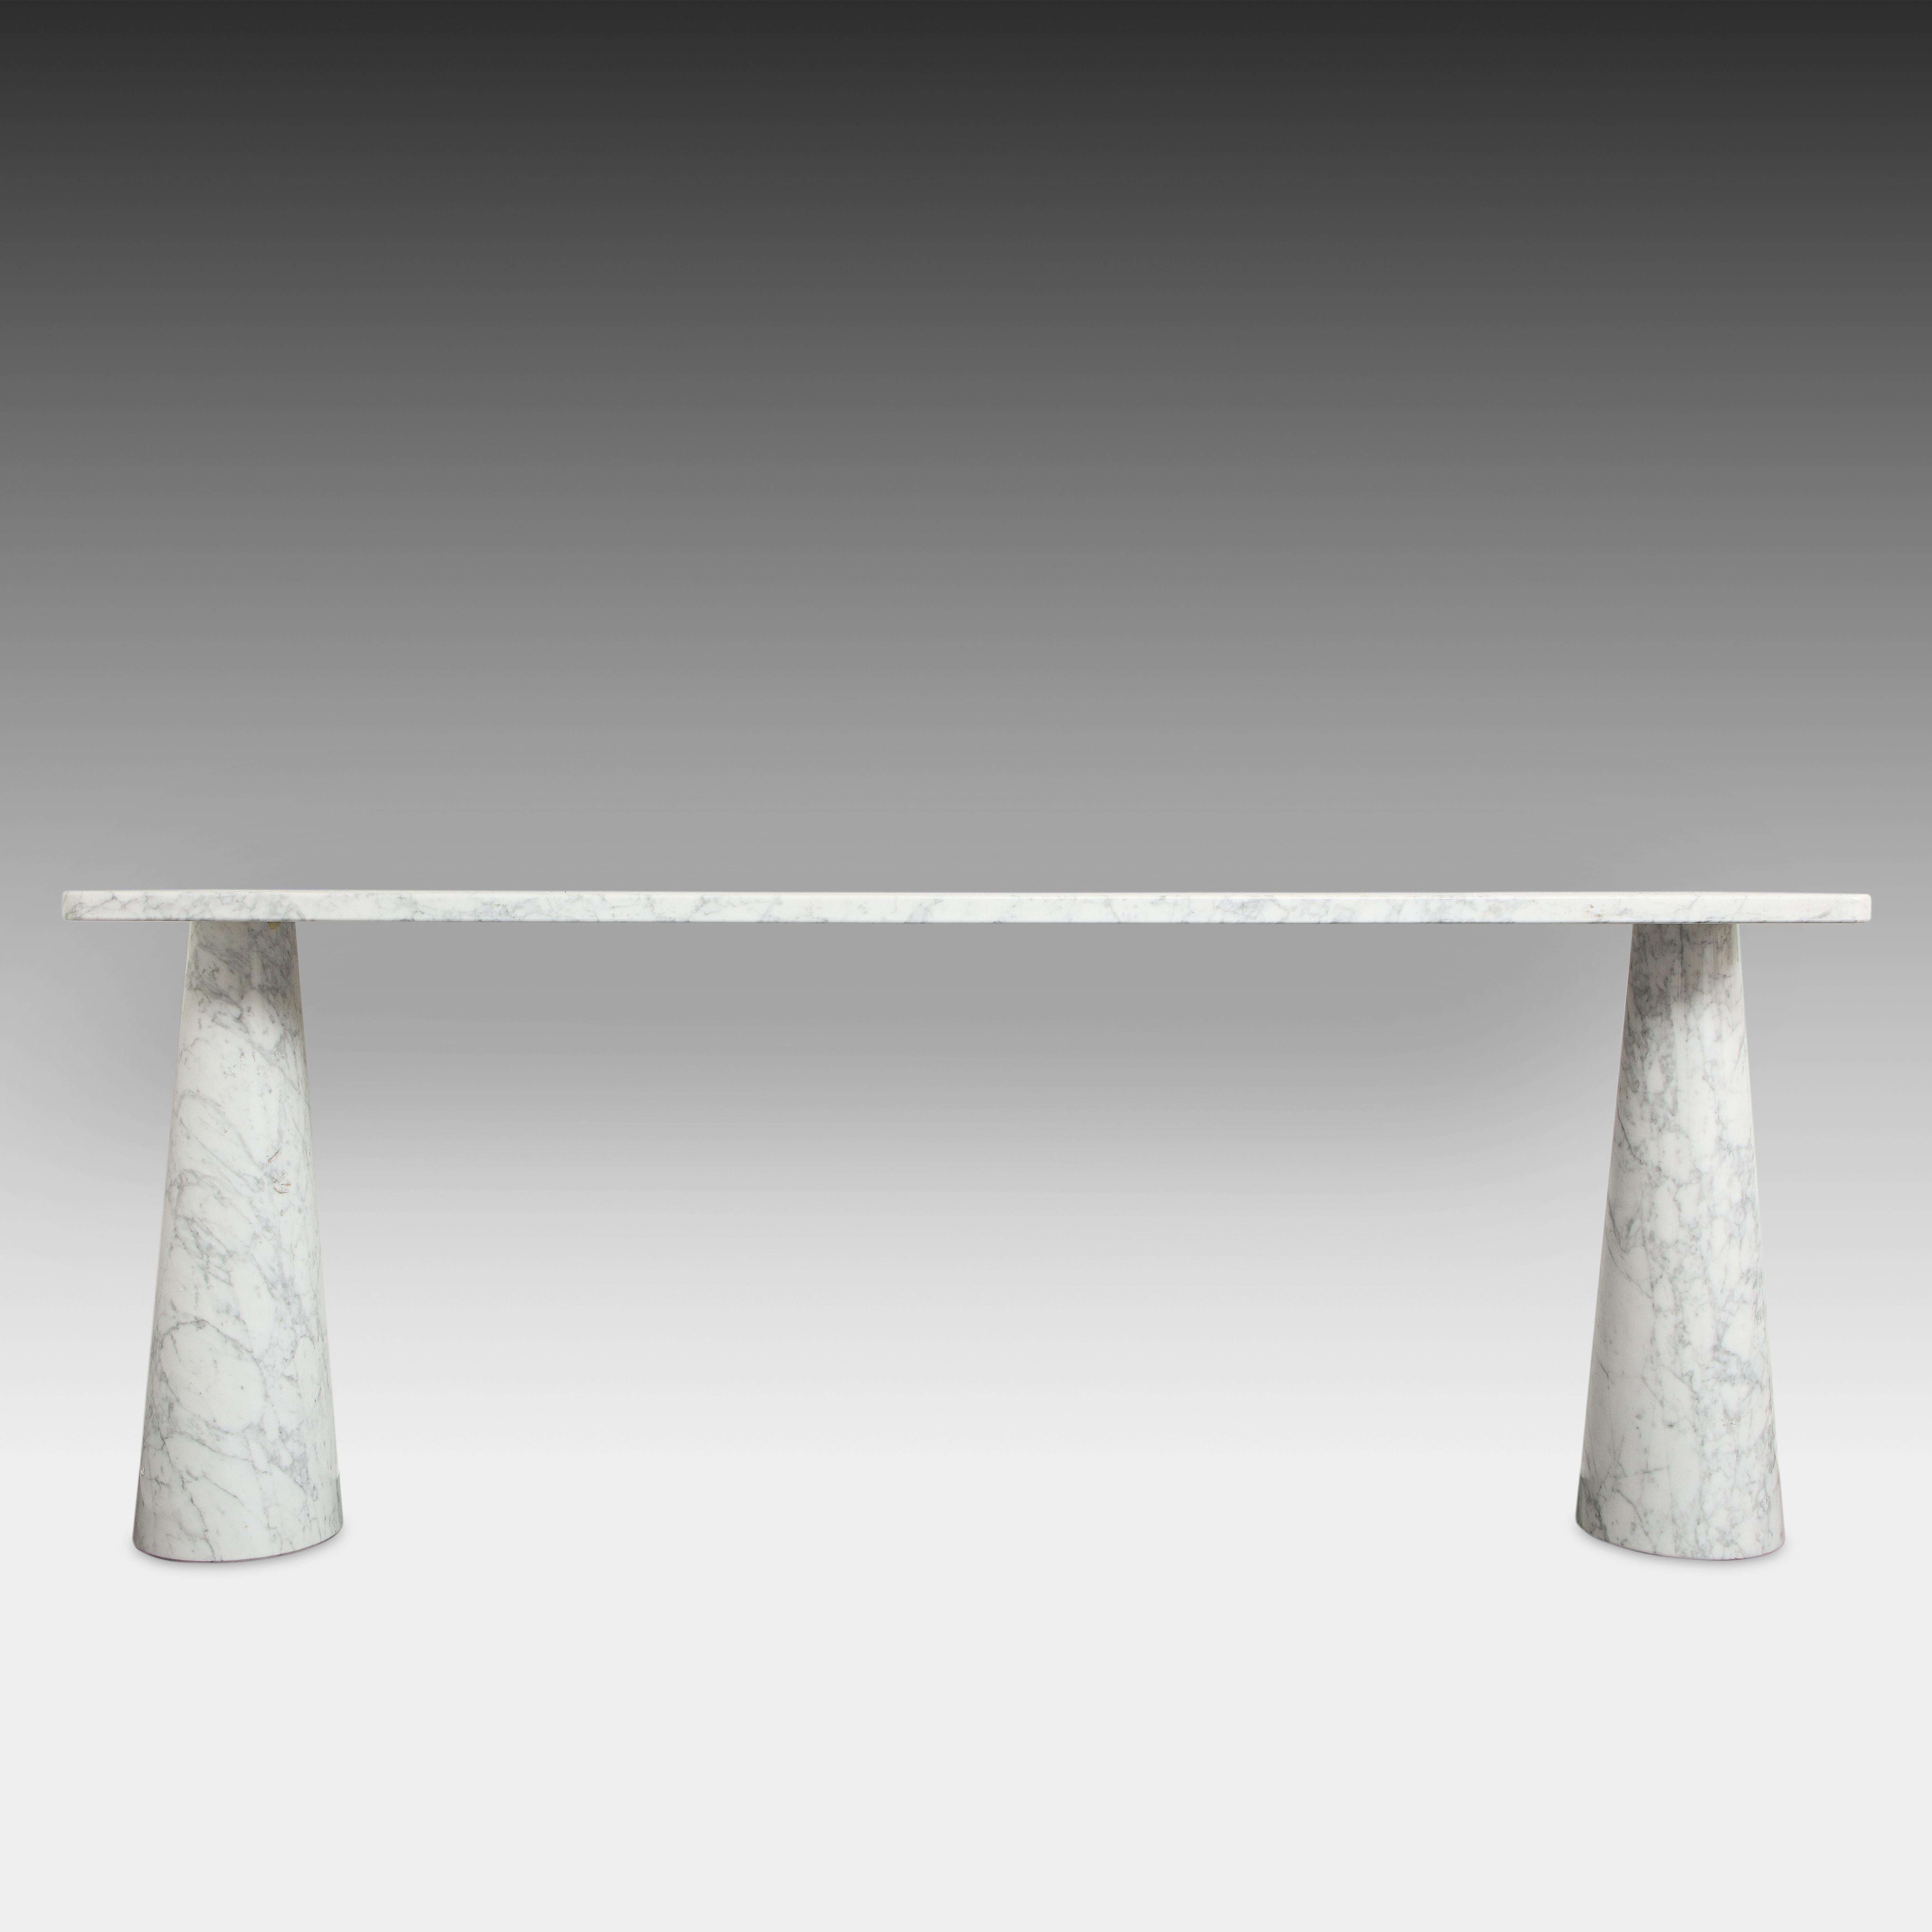 Designed by Angelo Mangiarotti for Skipper from the 'Eros' series, iconic Carrara marble console table with top fitted on two conical bases. This console is the larger rectangular model. This elegantly organic console table has beautiful subtle